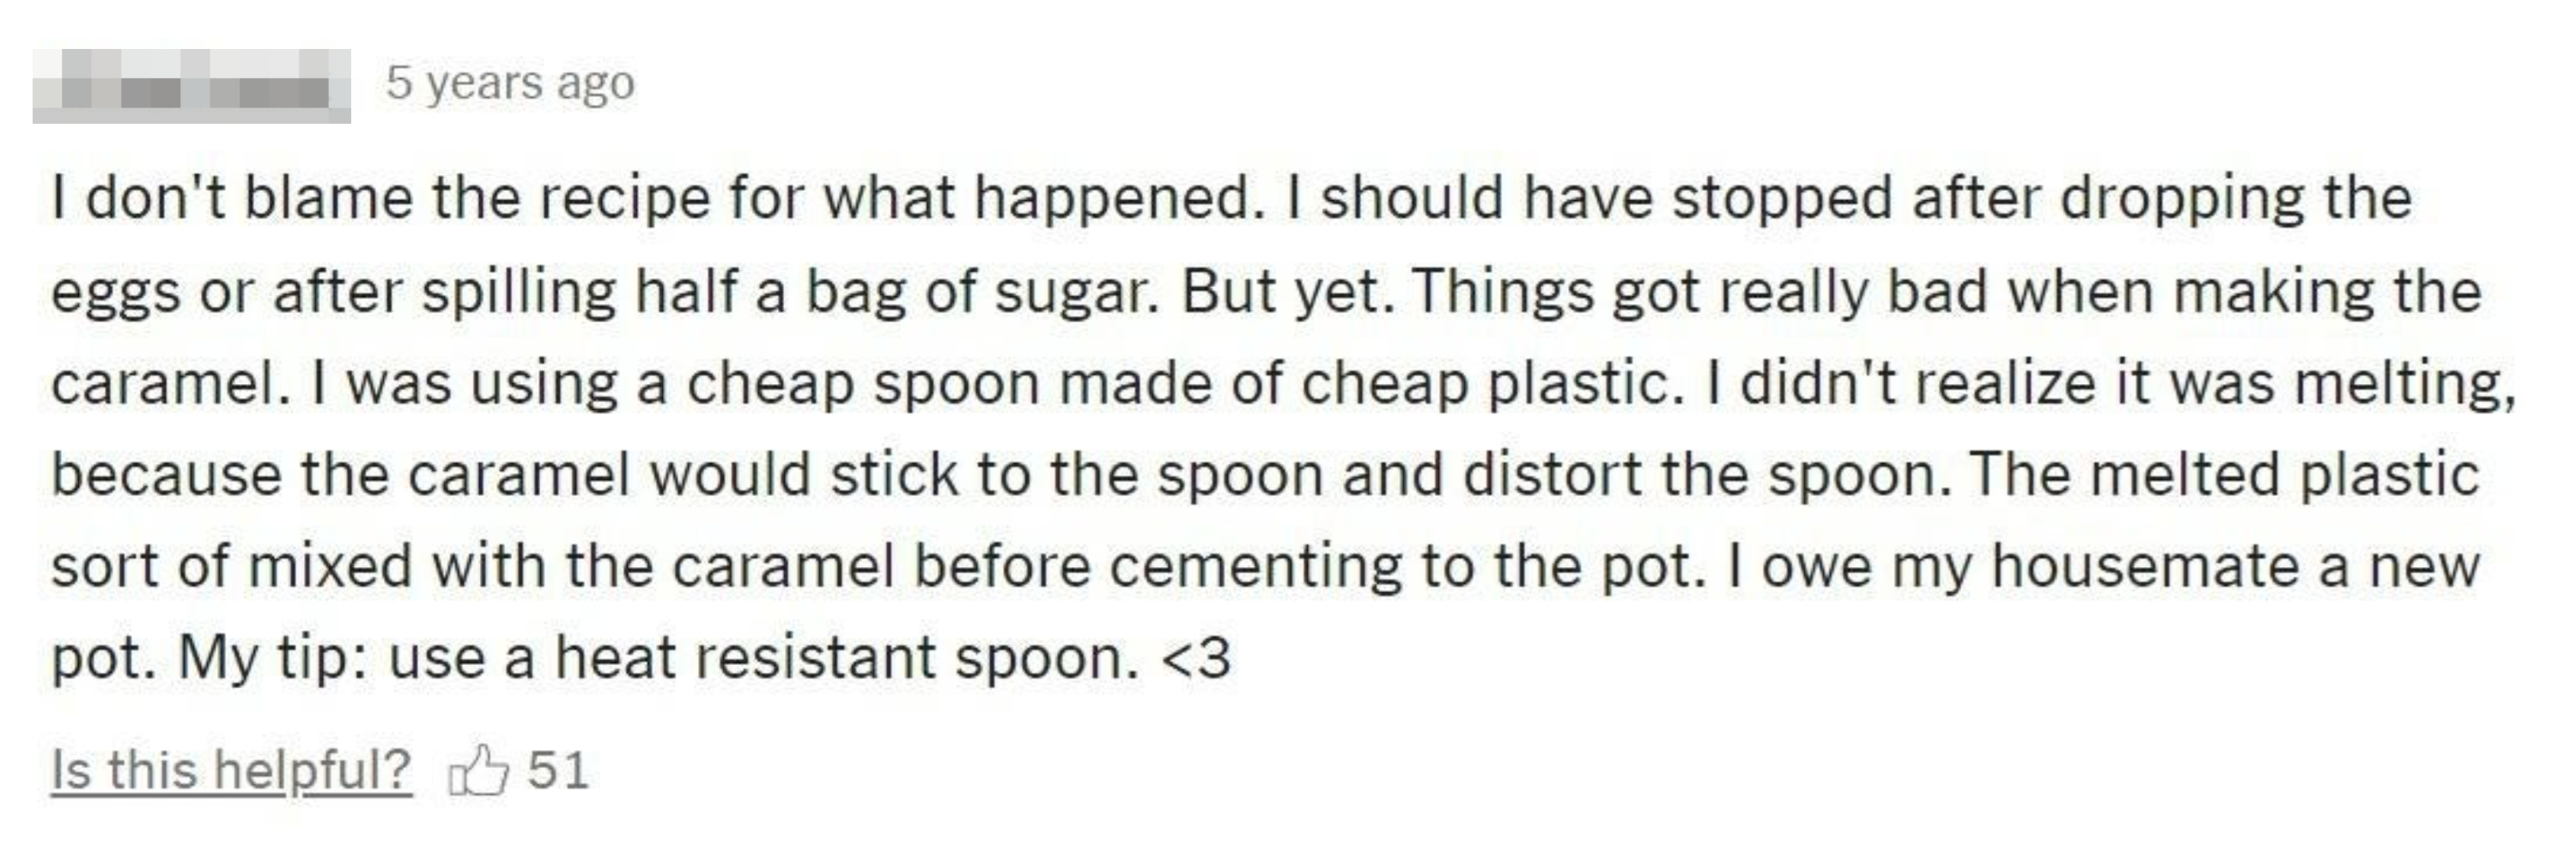 A chaotic review from someone who tried to make caramel and melted a plastic spoon into the caramel in the recipe in the process